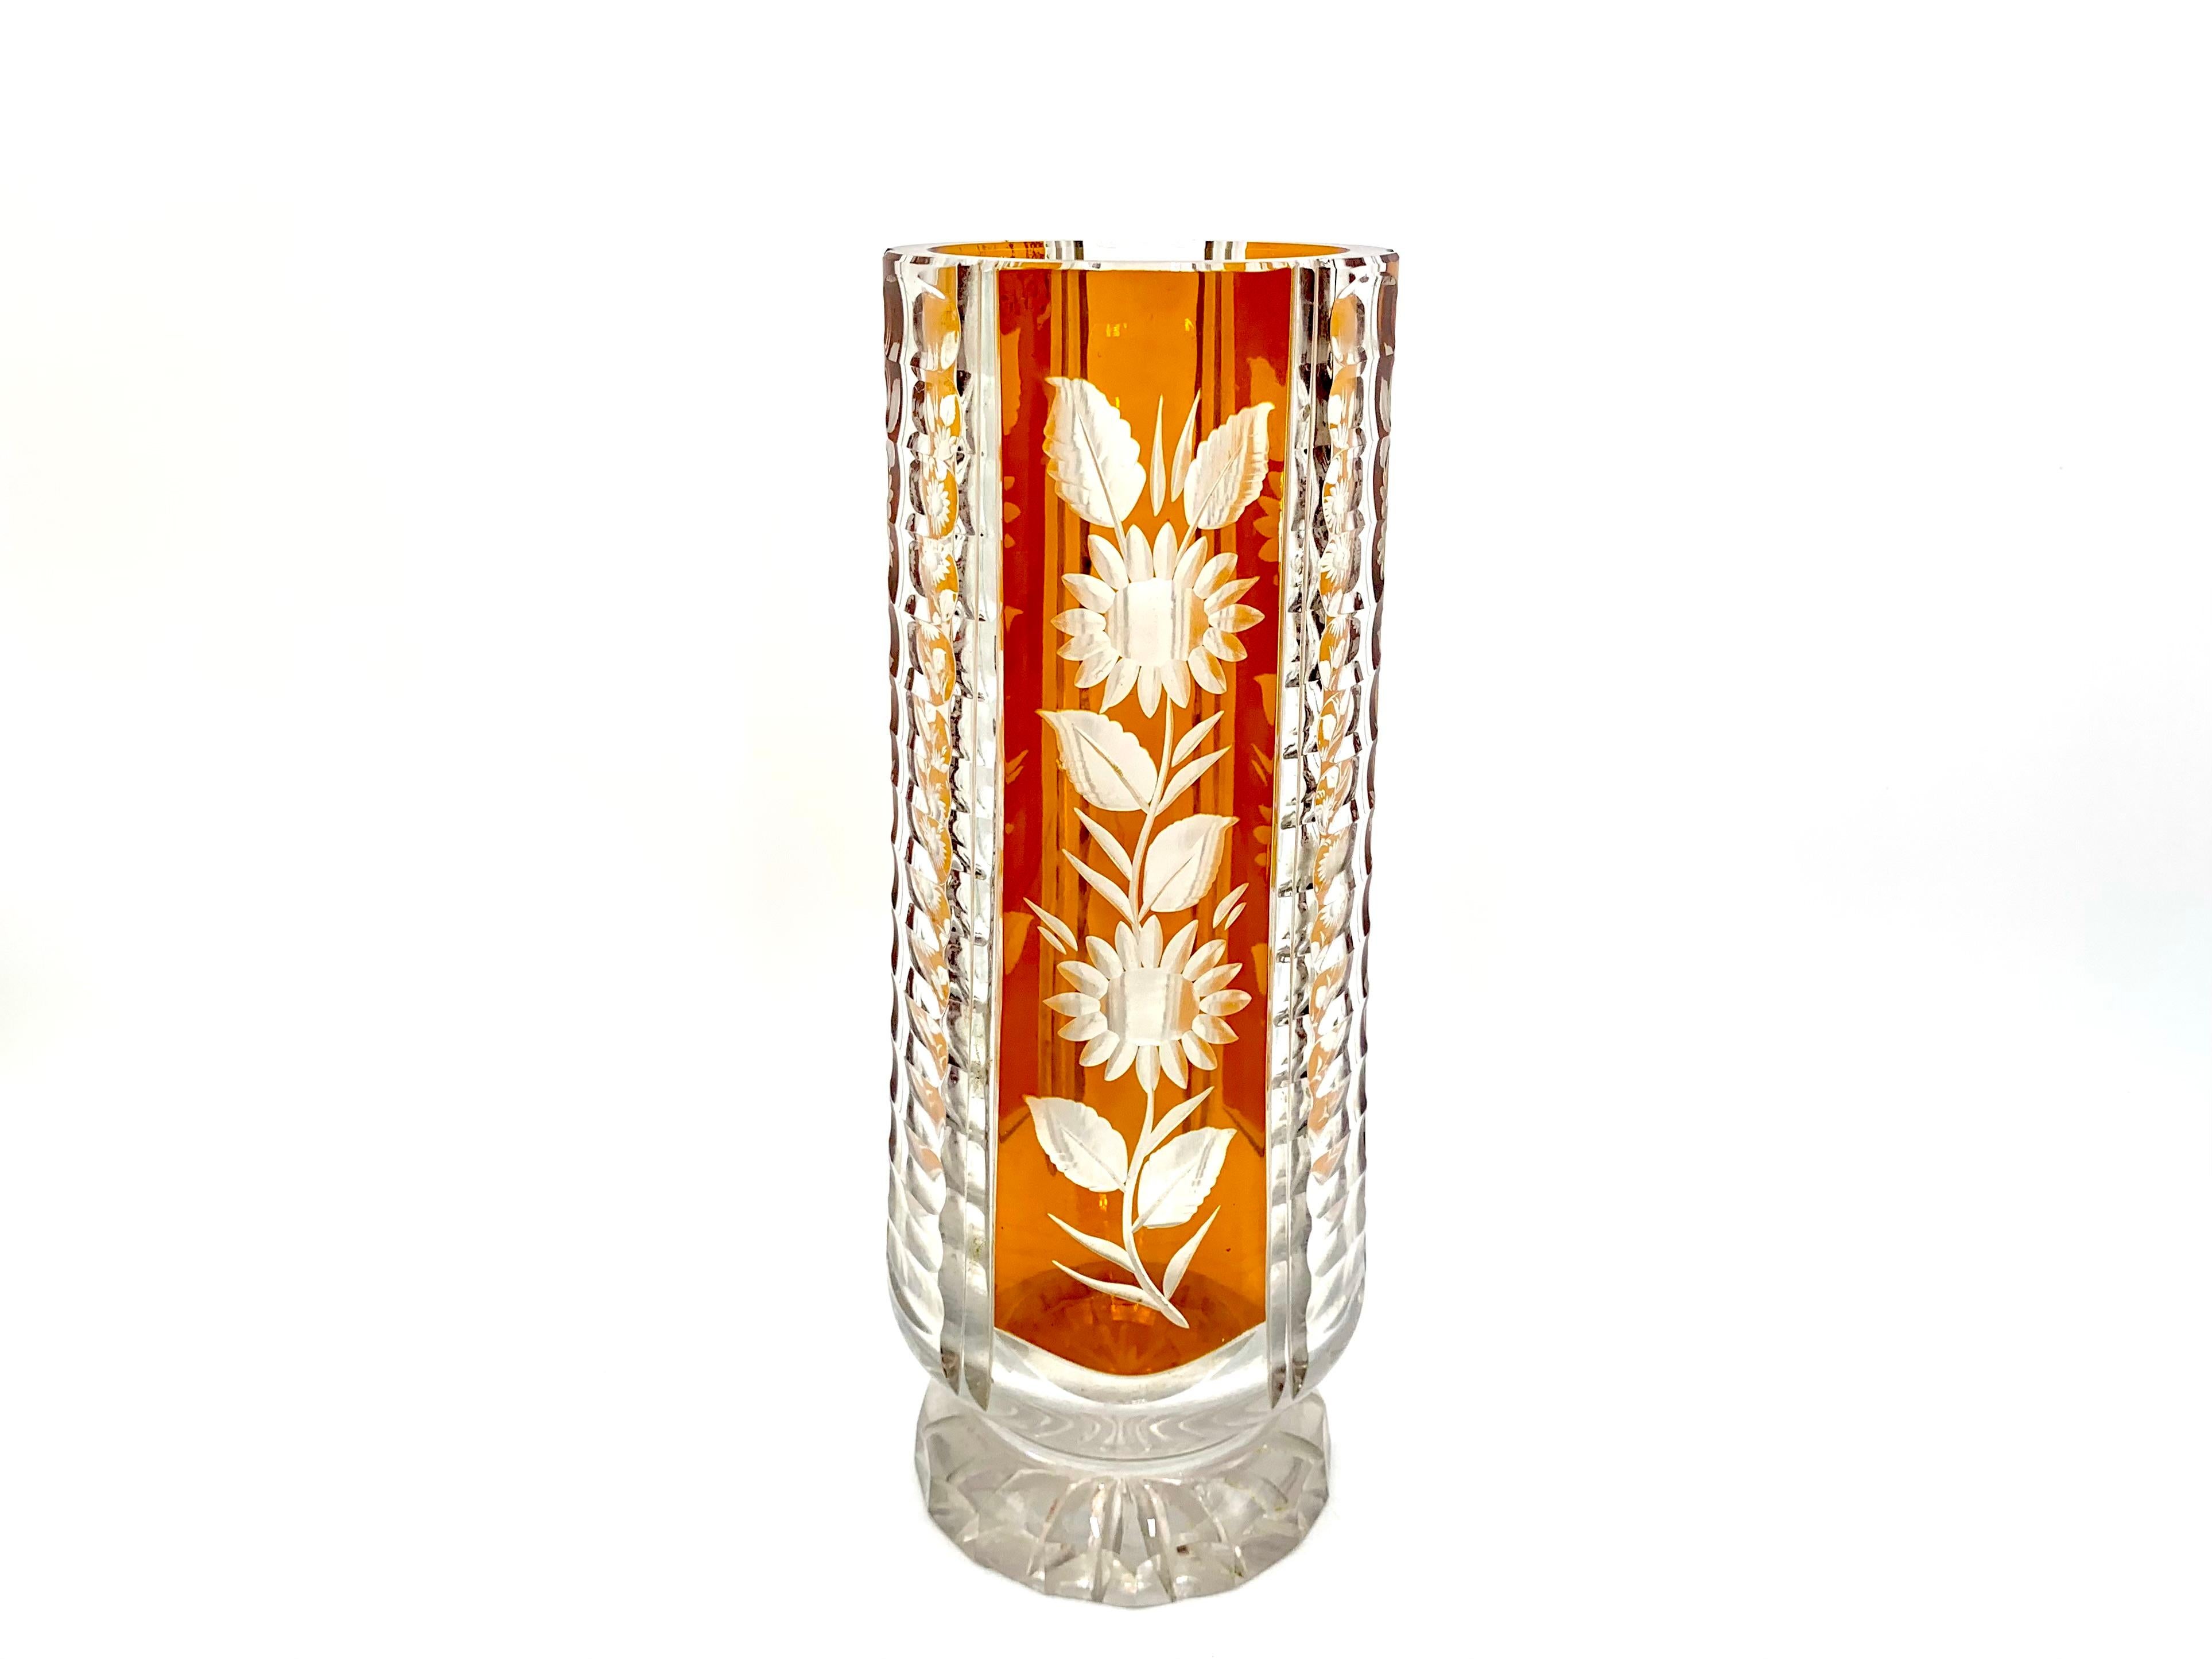 Crystal vase with honey glass and pattern. Produced in Poland by the Julia Glassworks in the 1960s.

Very good condition.

Measures: height 31cm, diameter 11cm.